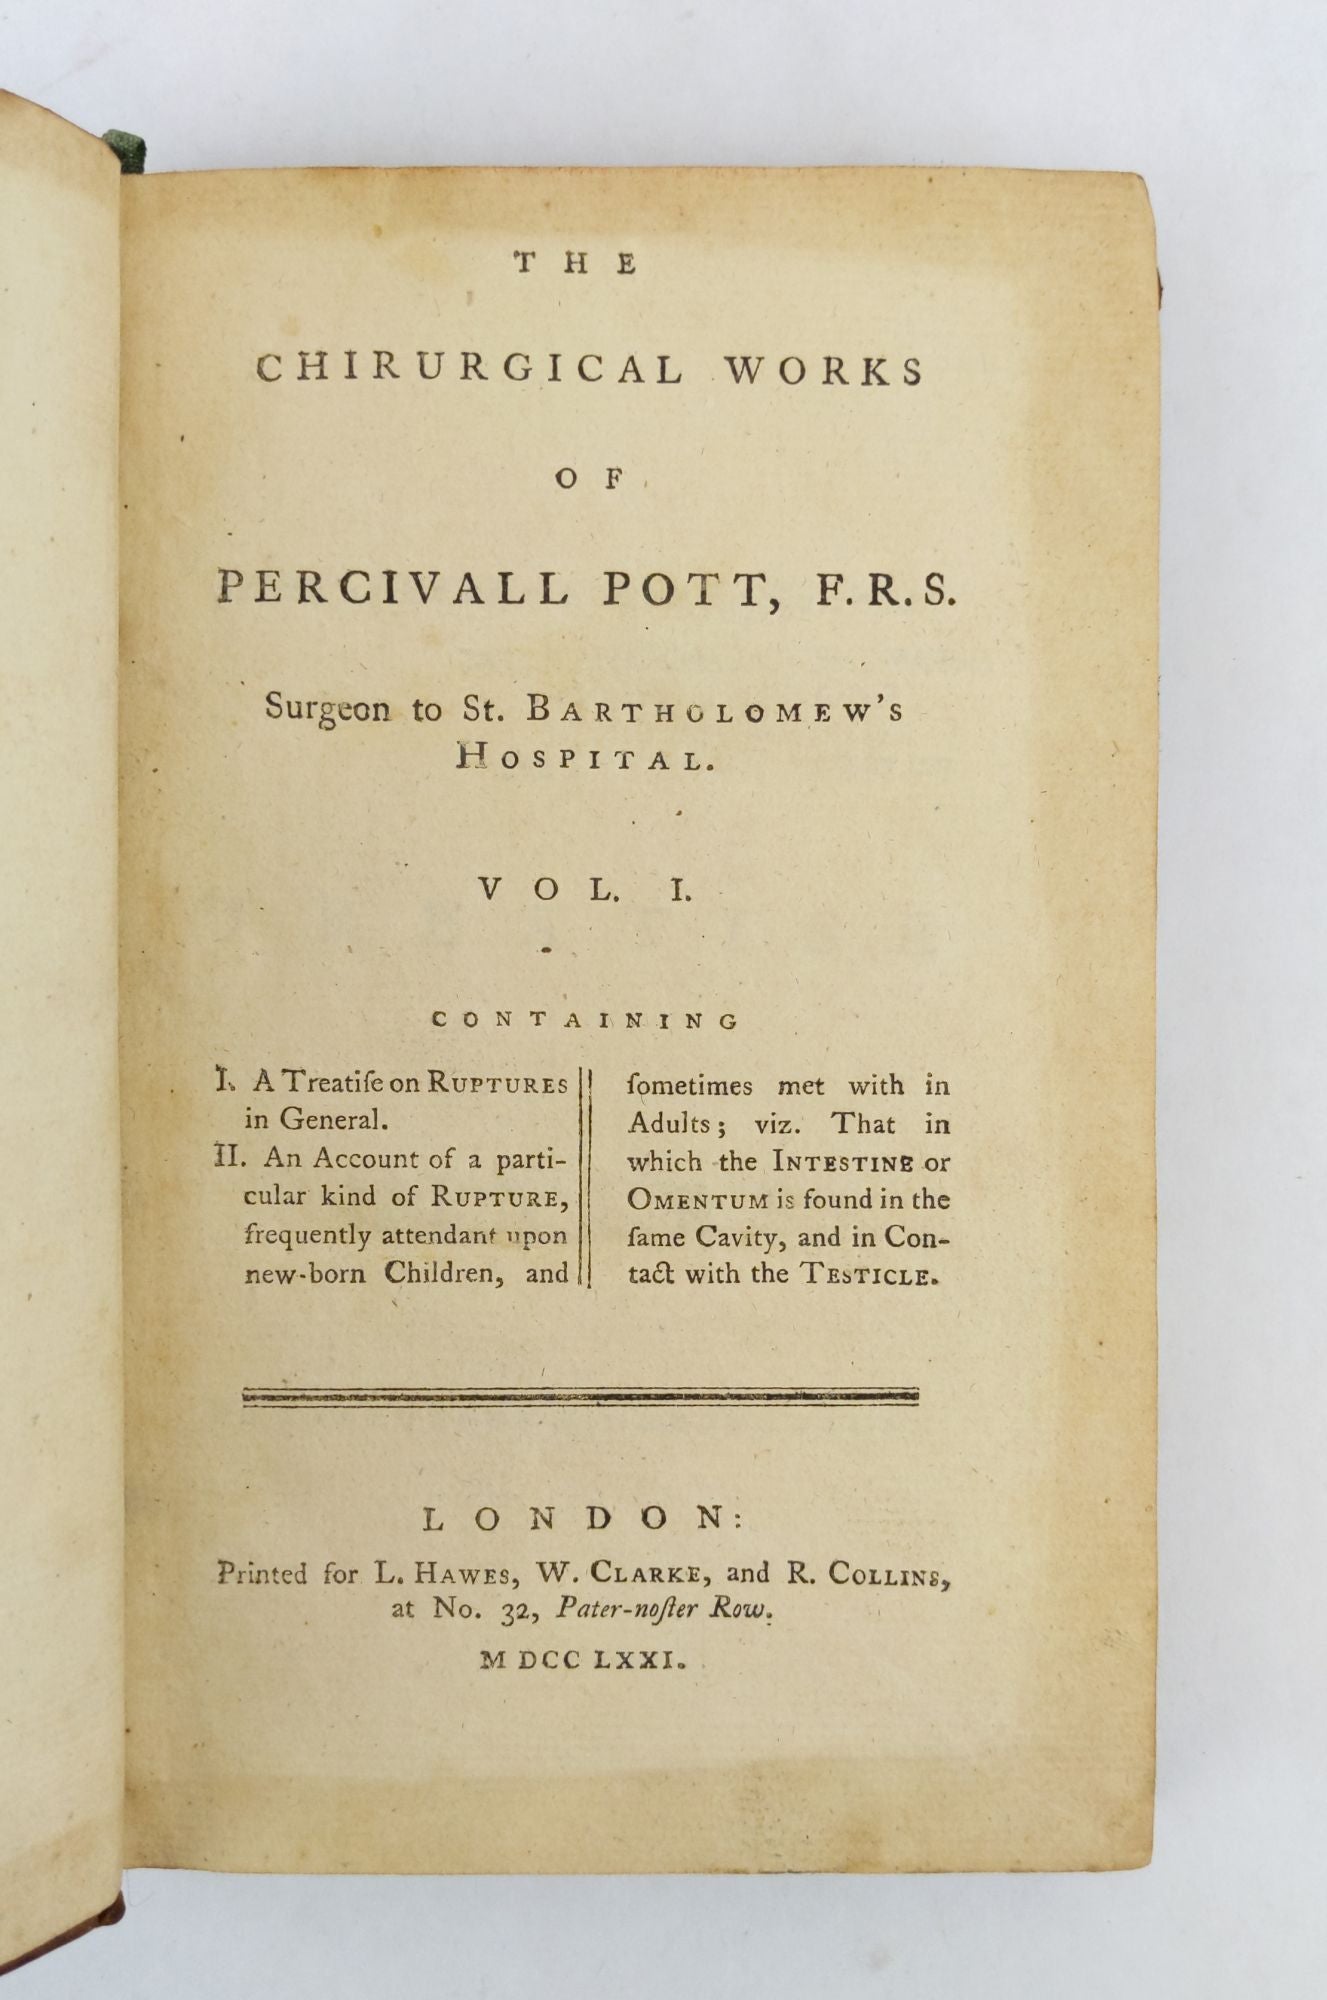 Product Image for THE CHIRURGICAL WORKS OF PERCIVAL POTT, F.R.S. [Volumes I-IV, Only]